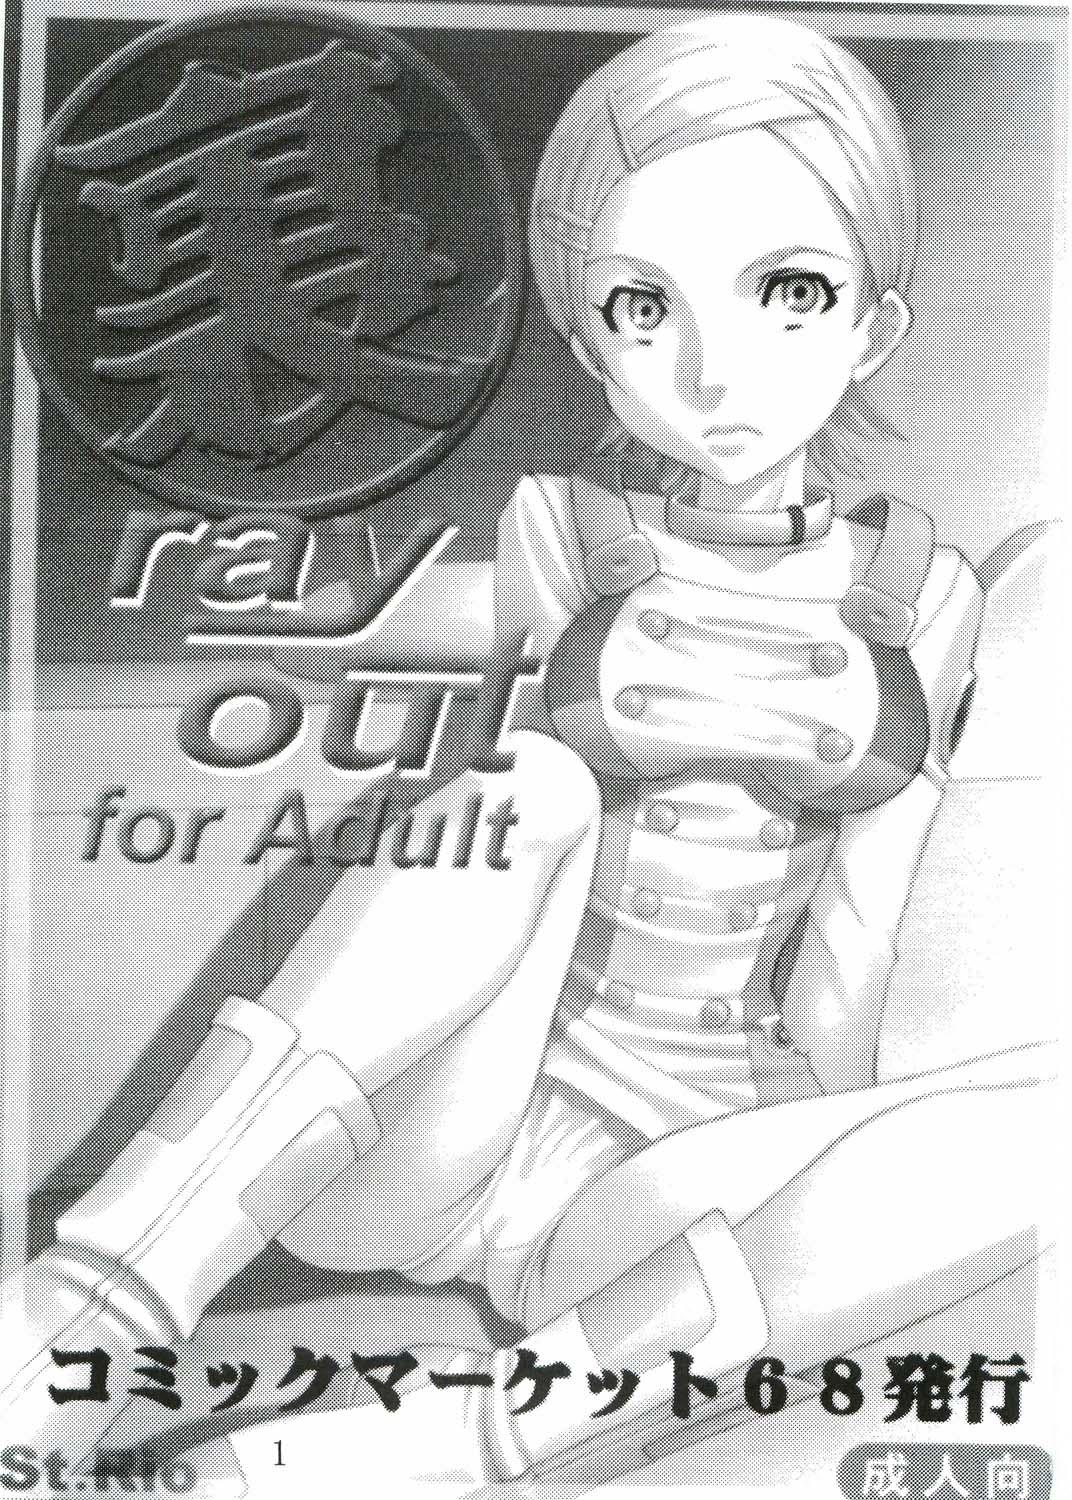 Sucking Ura ray-out - Eureka 7 Nudes - Page 2